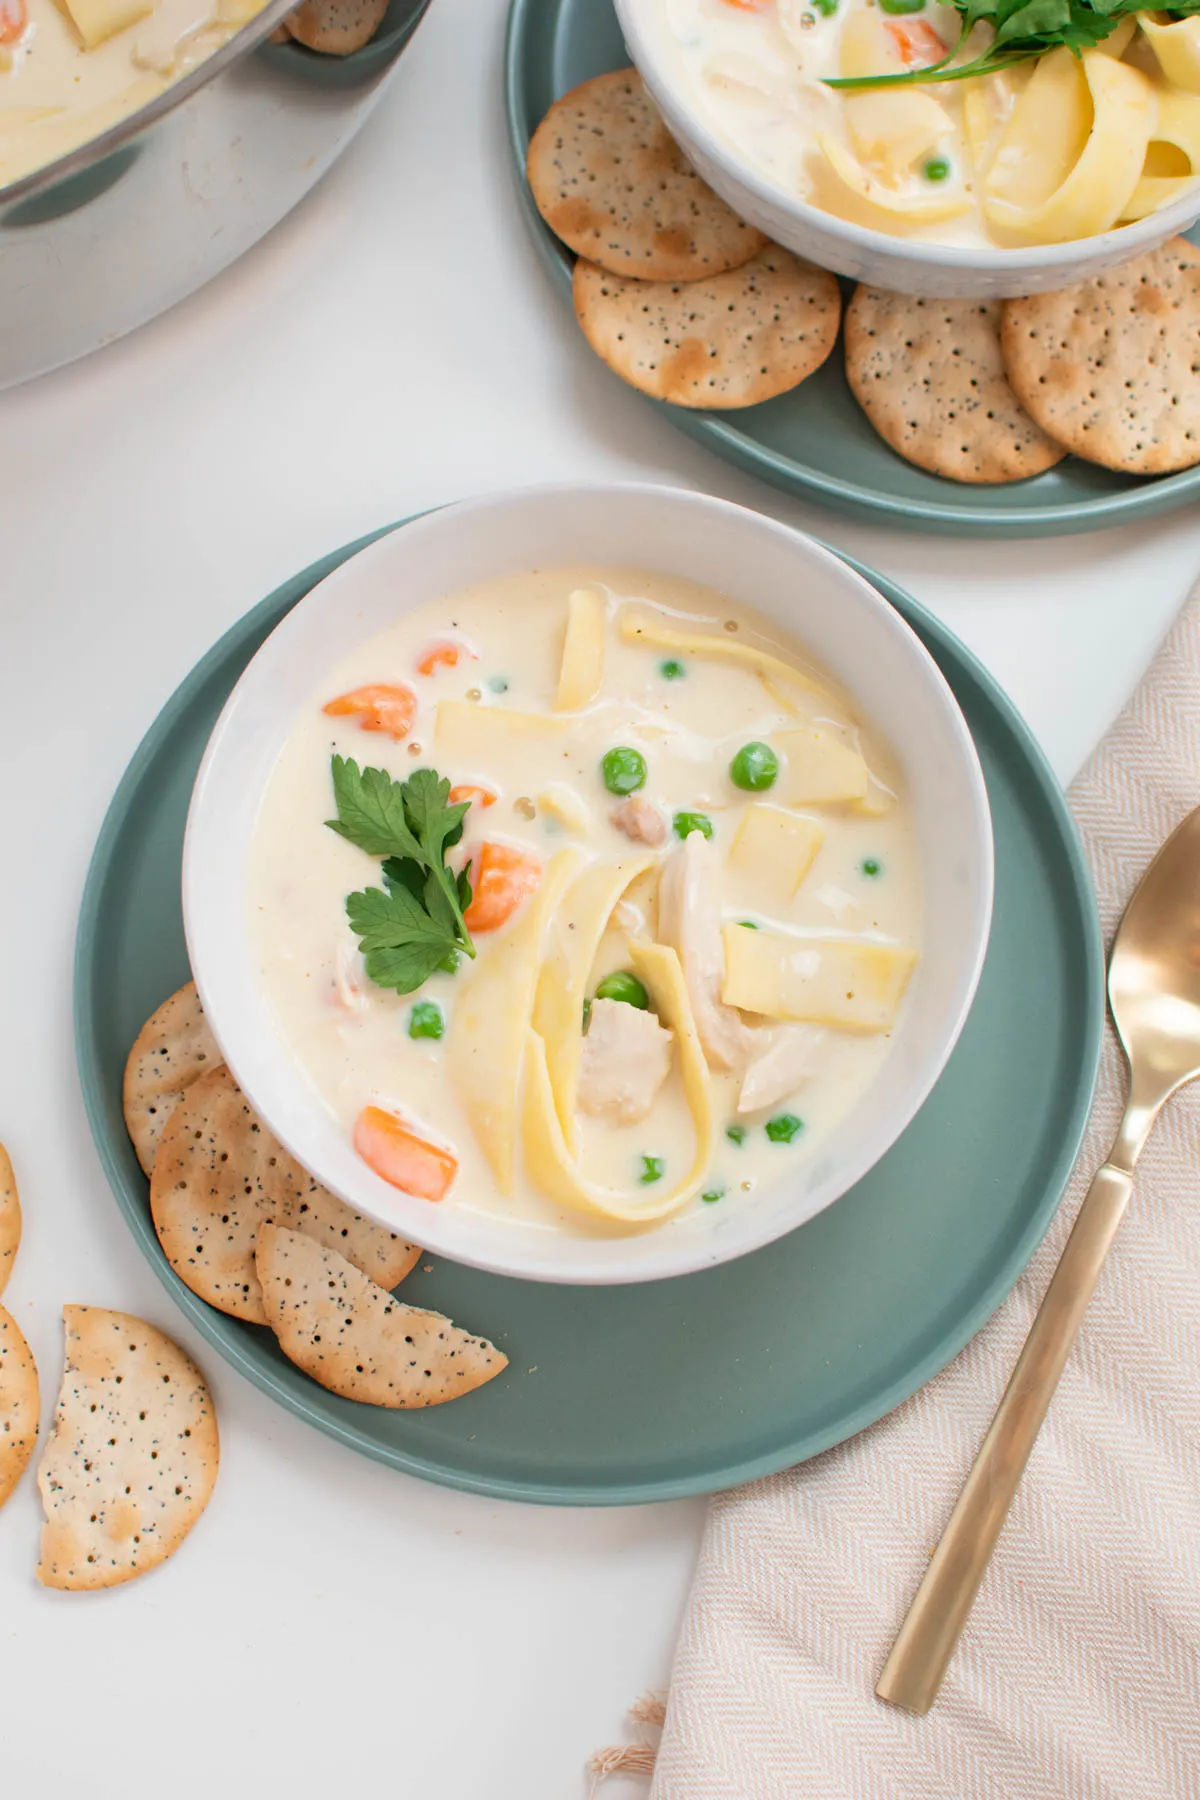 Bowl of creamy chicken noodle soup on green plate with crackers.